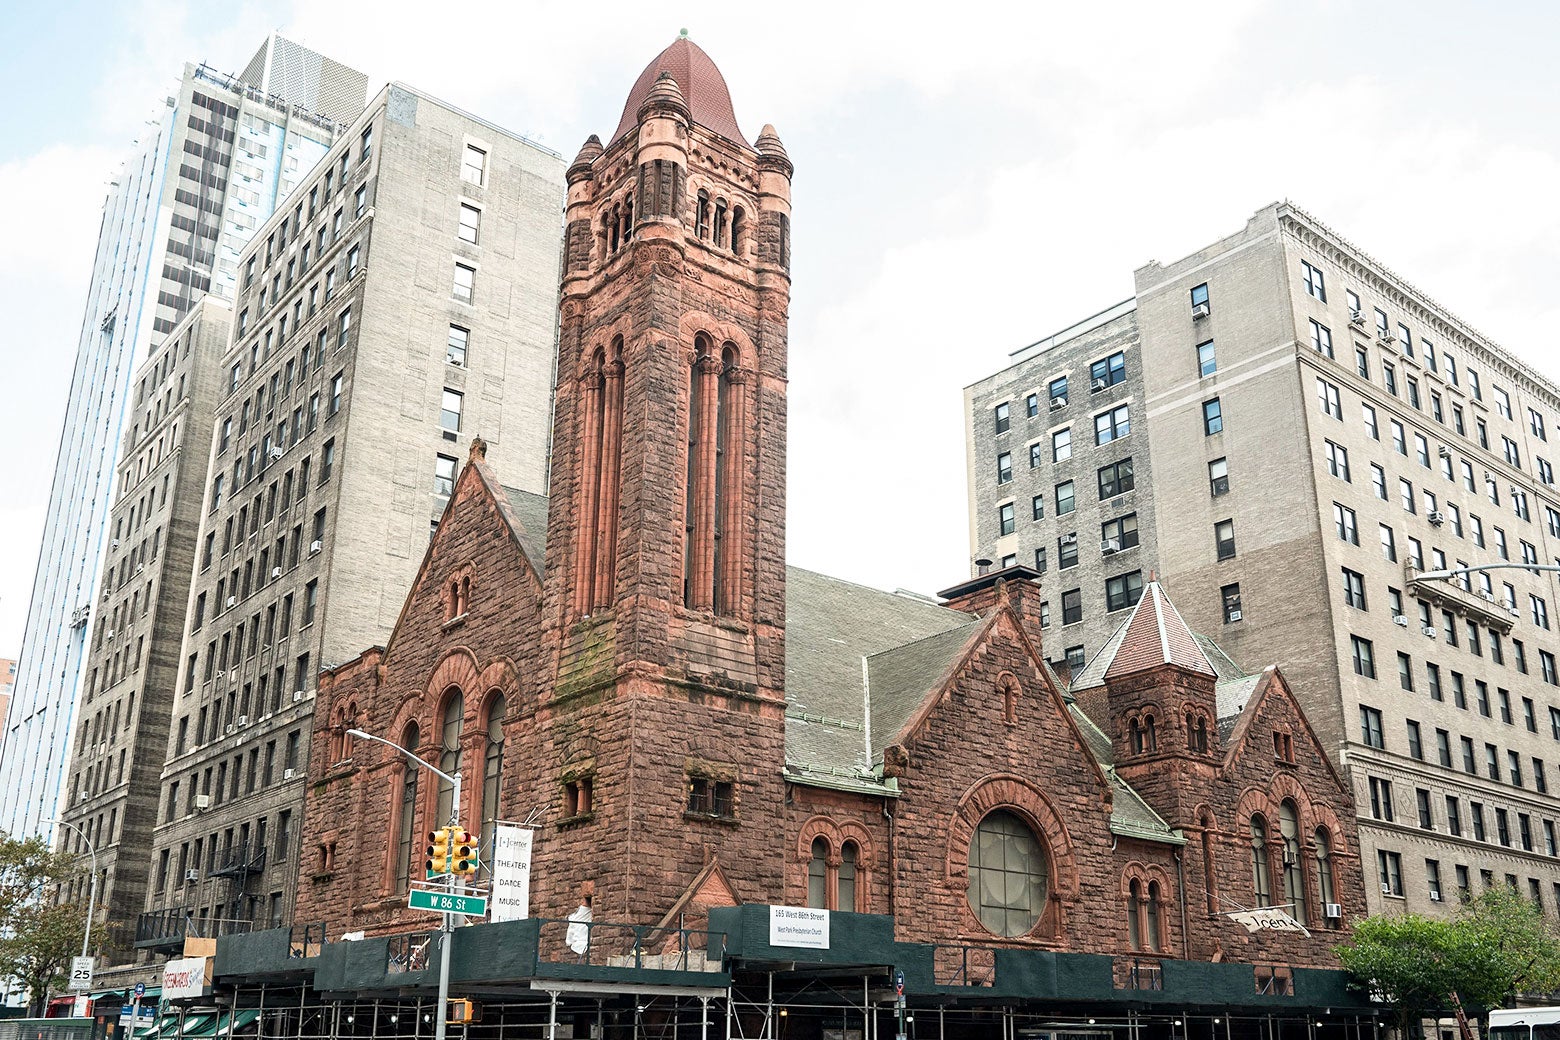 A view of the West Park Presbyterian Church in Manhattan, surrounded on either side by much taller buildings.